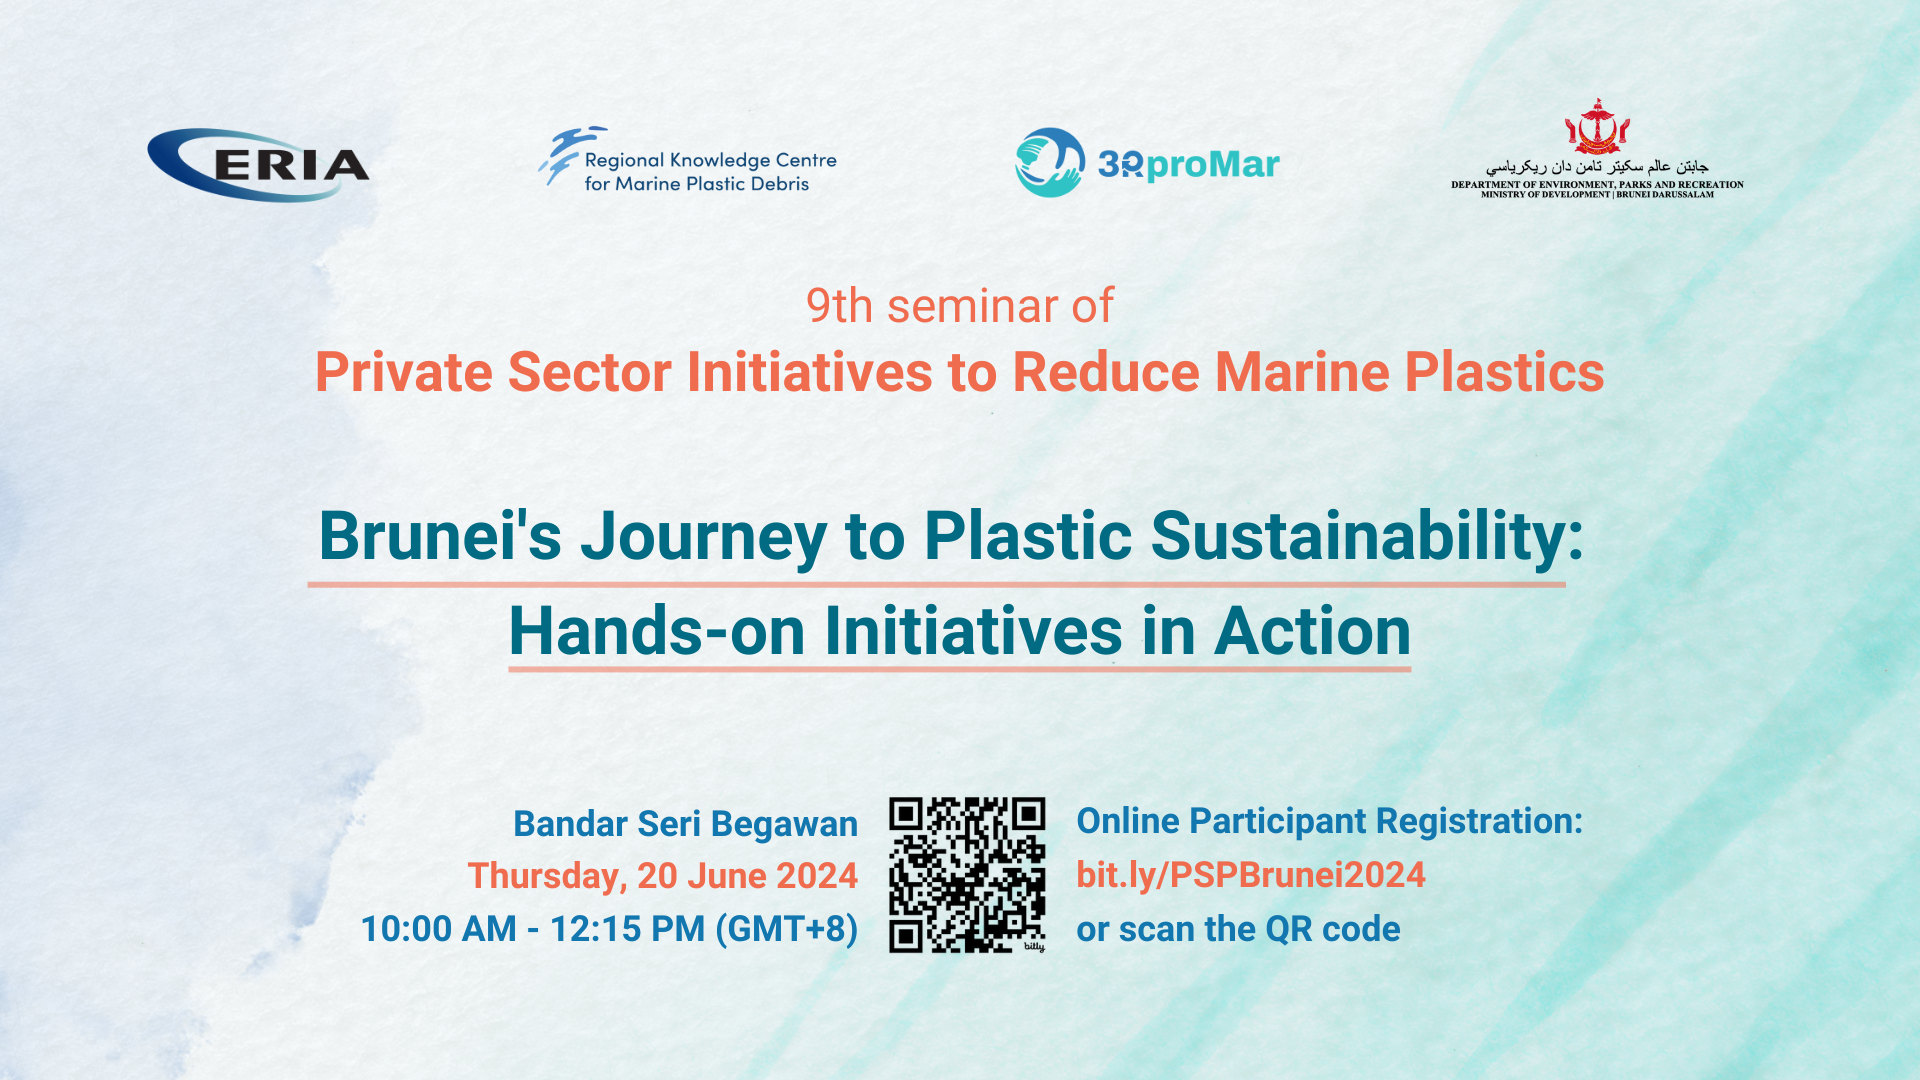 Sign Up Now for Webinar on Private Sector Efforts to Combat Marine Plastics in Brunei